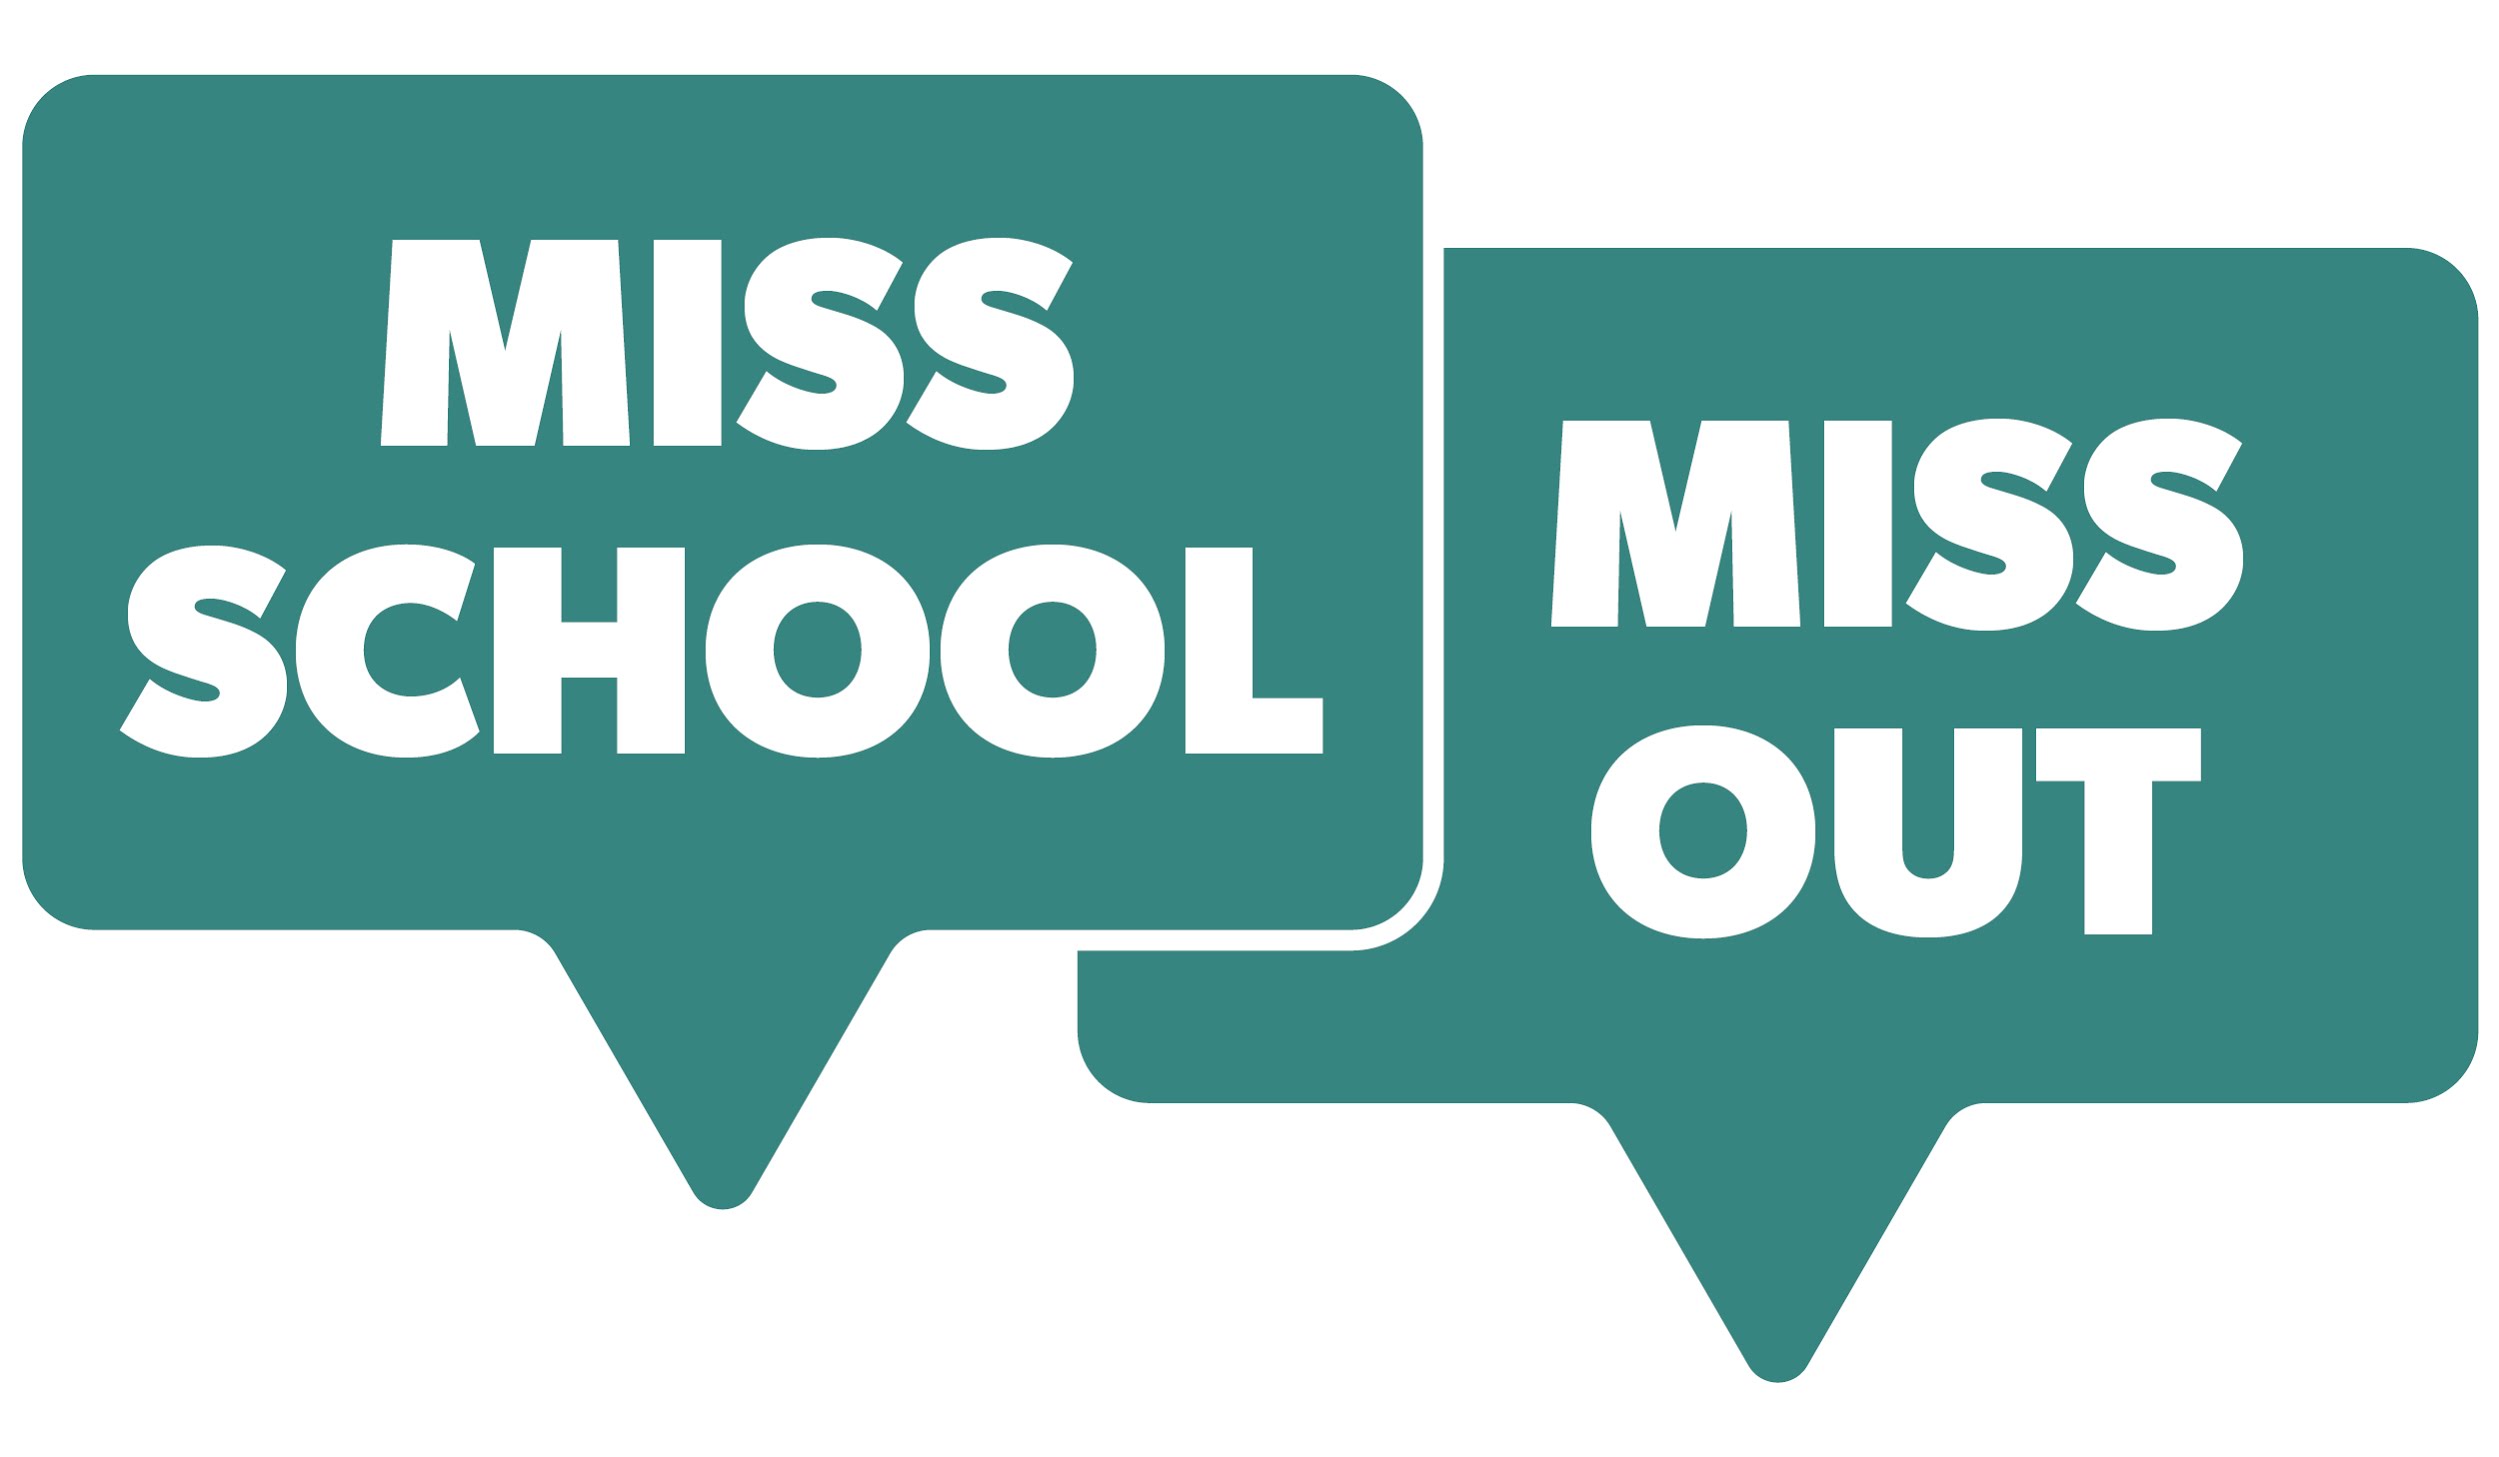 MISS SCHOOL MISS OUT LOGO